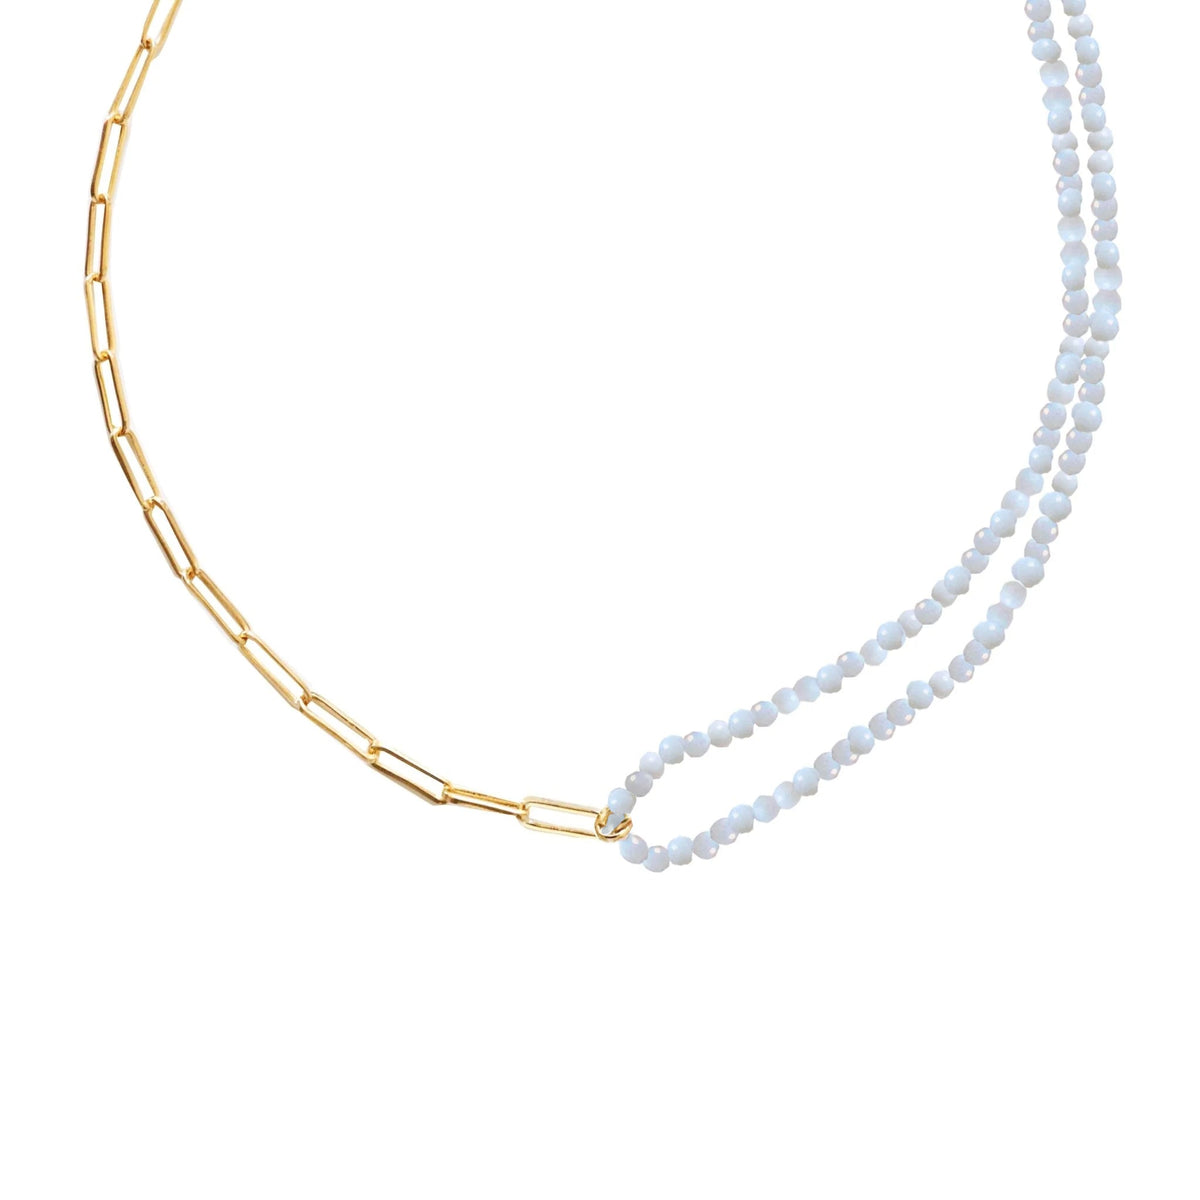 POISE BEADED LINK NECKLACE - ARCTIC BLUE OPAL &amp; GOLD 14-17&quot; - SO PRETTY CARA COTTER